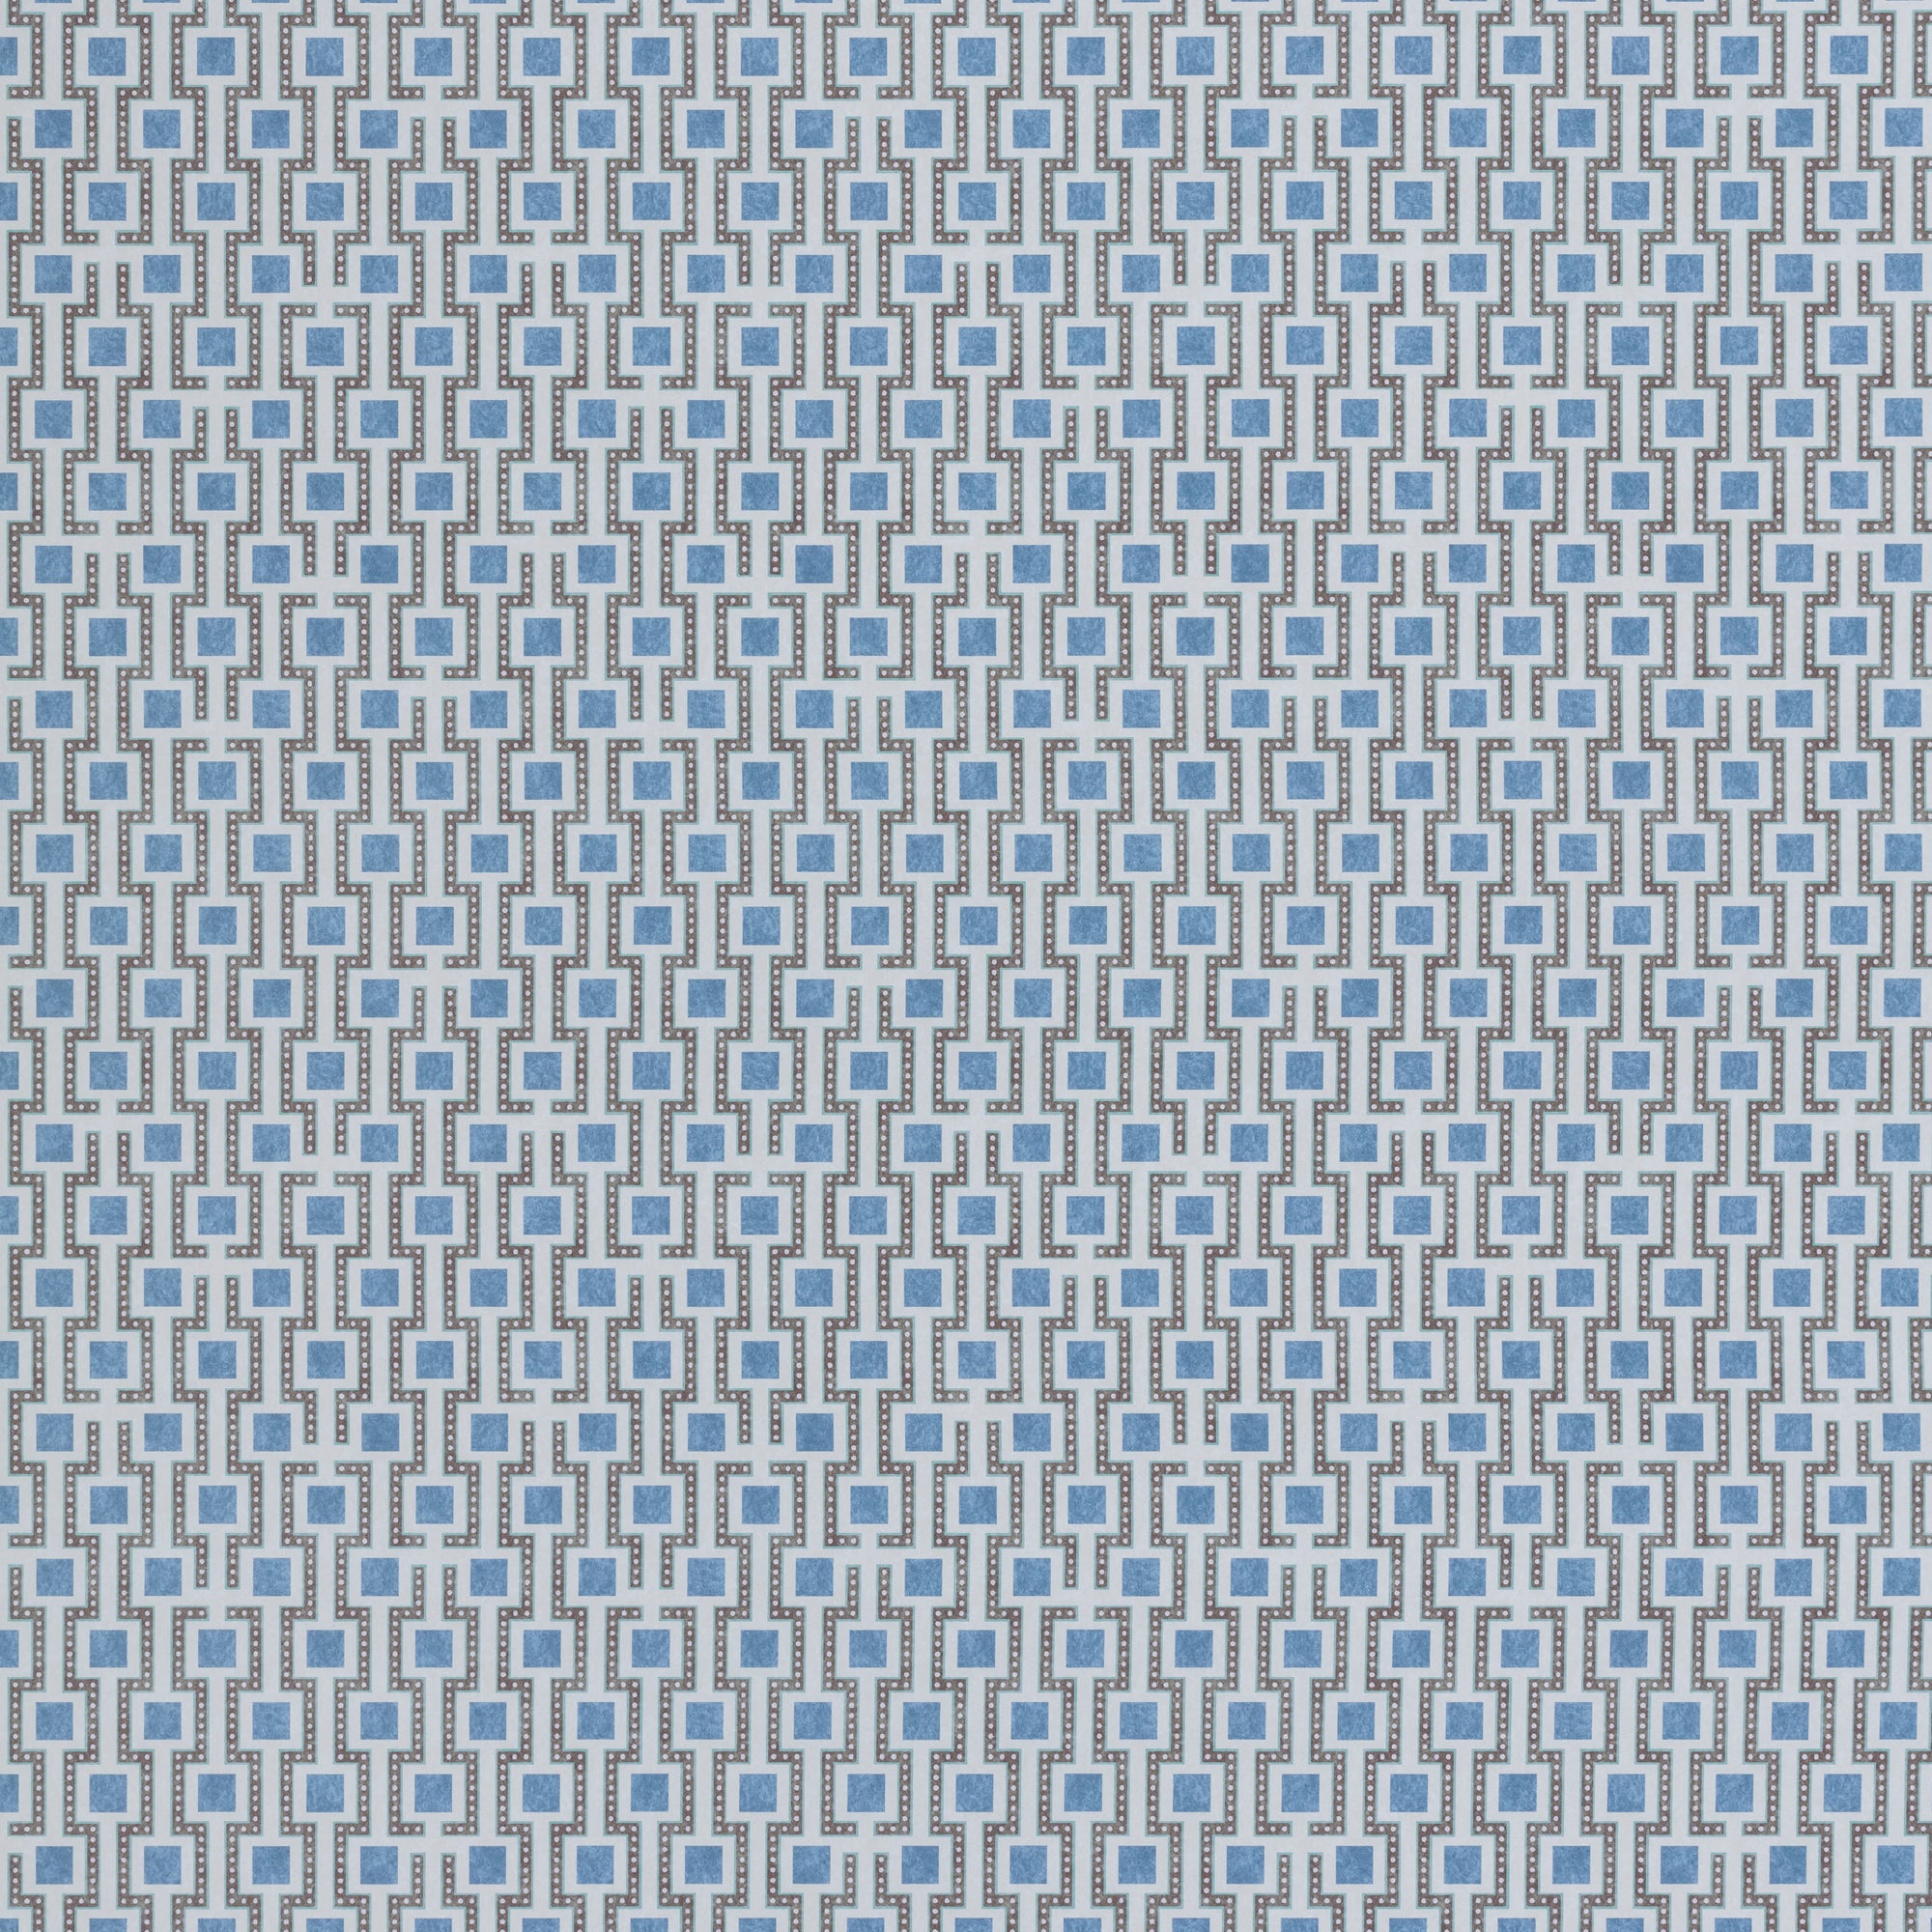 Wallpaper panel in a geometric grid print in shades of blue and gray.